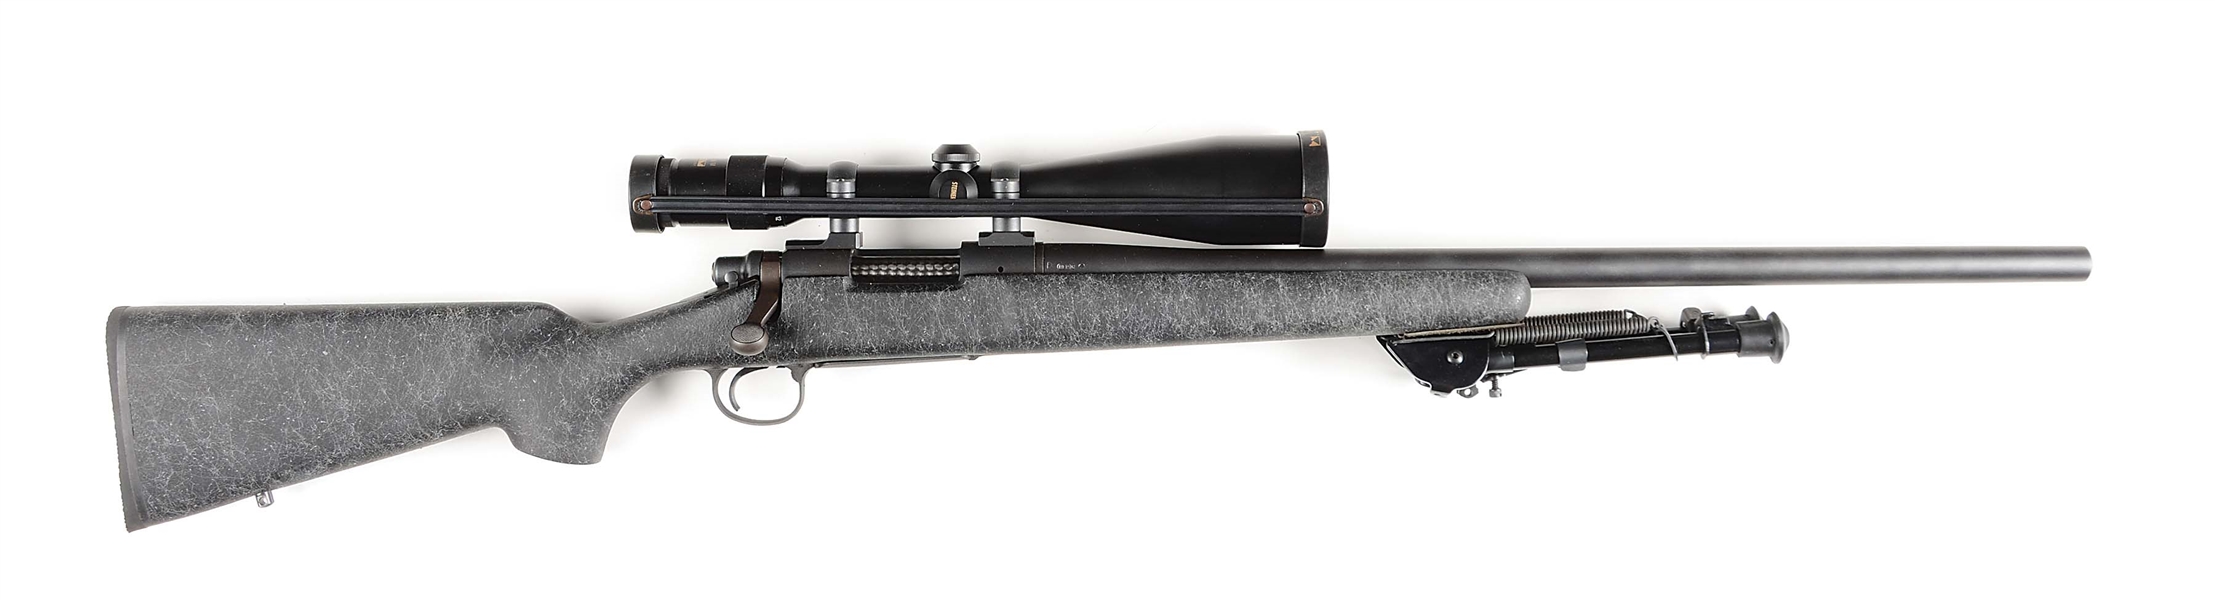 (M) REMINGTON MODEL 700 BOLT ACTION RIFLE WITH STEINER SCOPE.